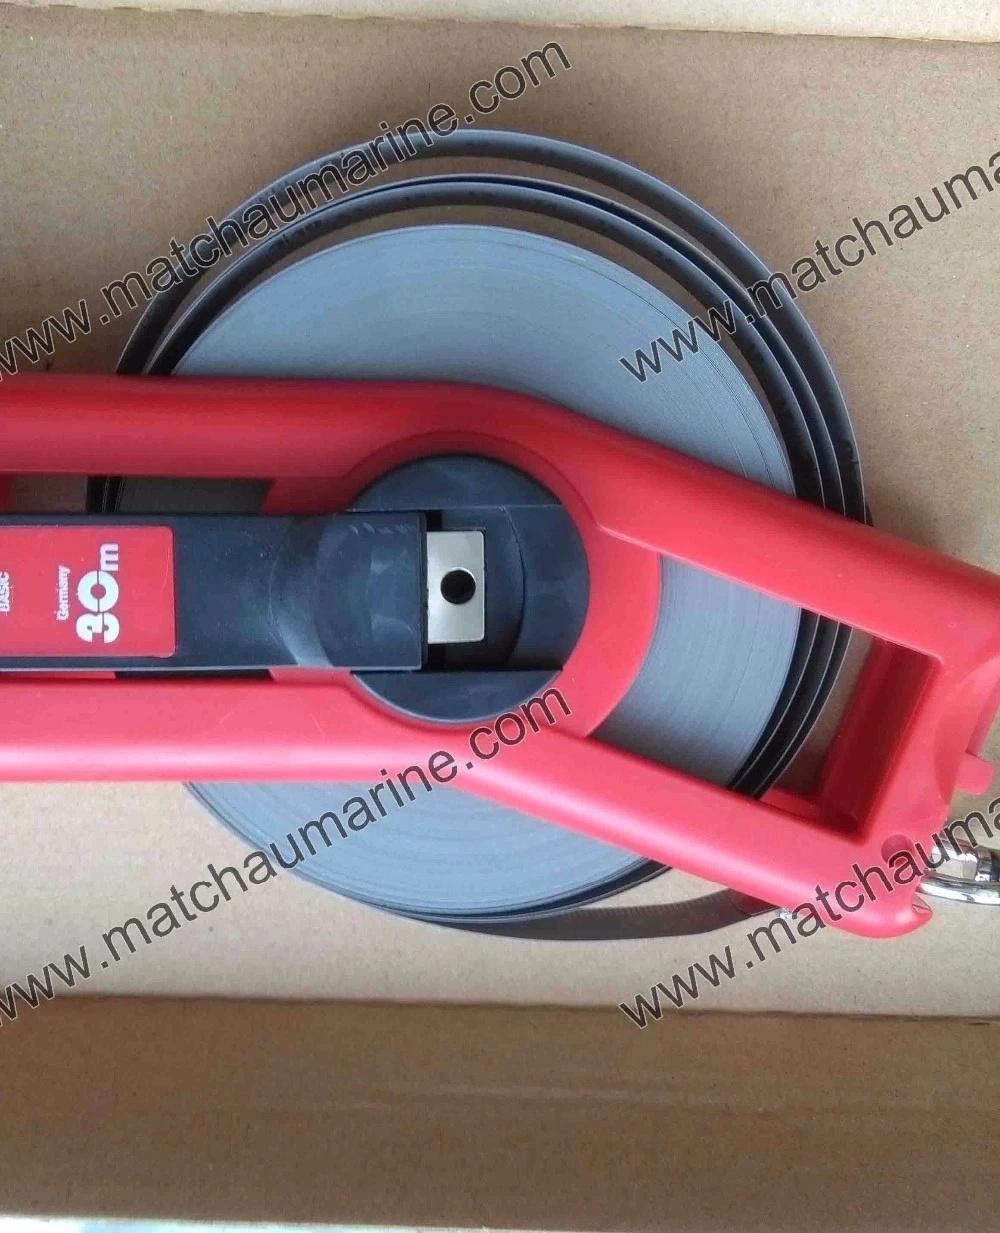 30m Stainless Steel Oil Dipping Sounding Measuring Tape